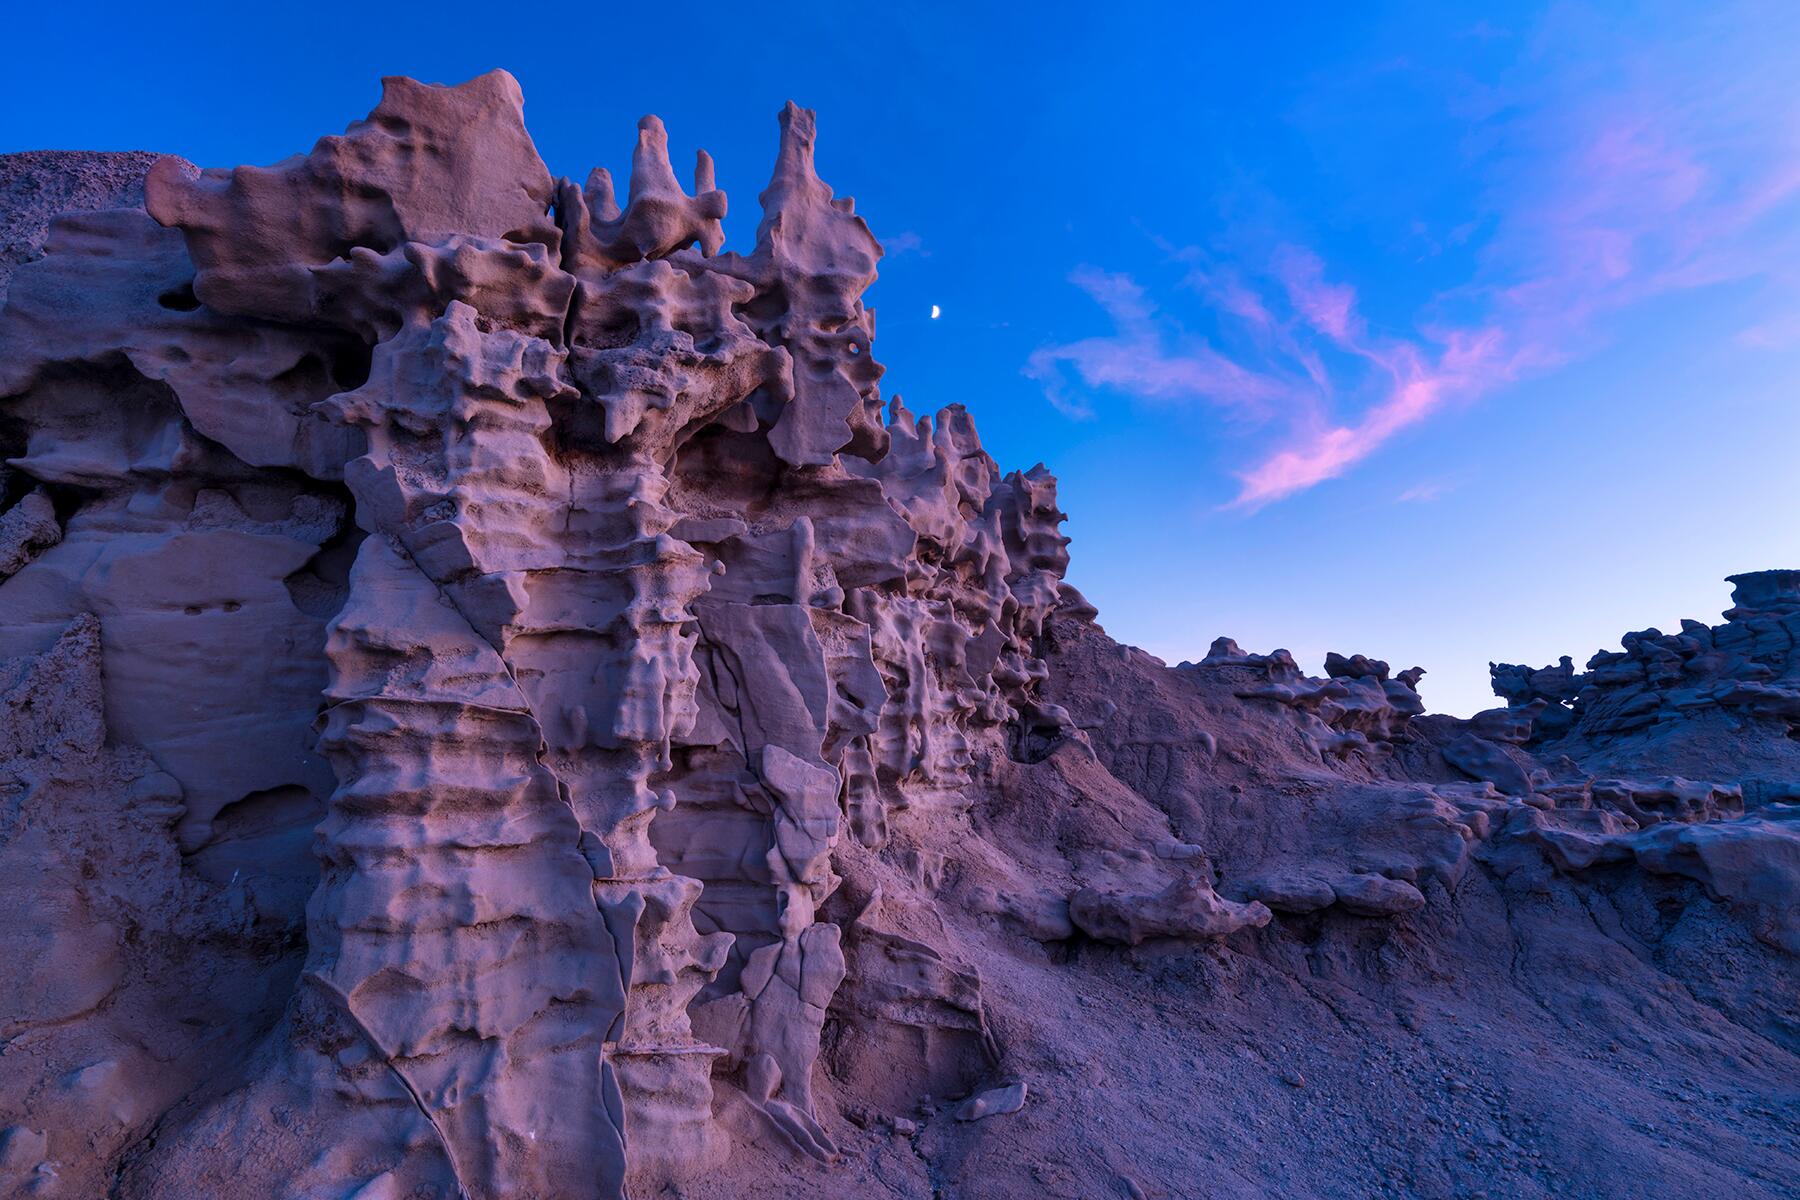 <a href='https://www.fodors.com/world/north-america/usa/utah/experiences/news/photos/ultimate-things-to-do-in-utah#'>From &quot;25 Ultimate Things to Do in Utah: Visit Fantasy Canyon Before It Goes Viral&quot;</a>